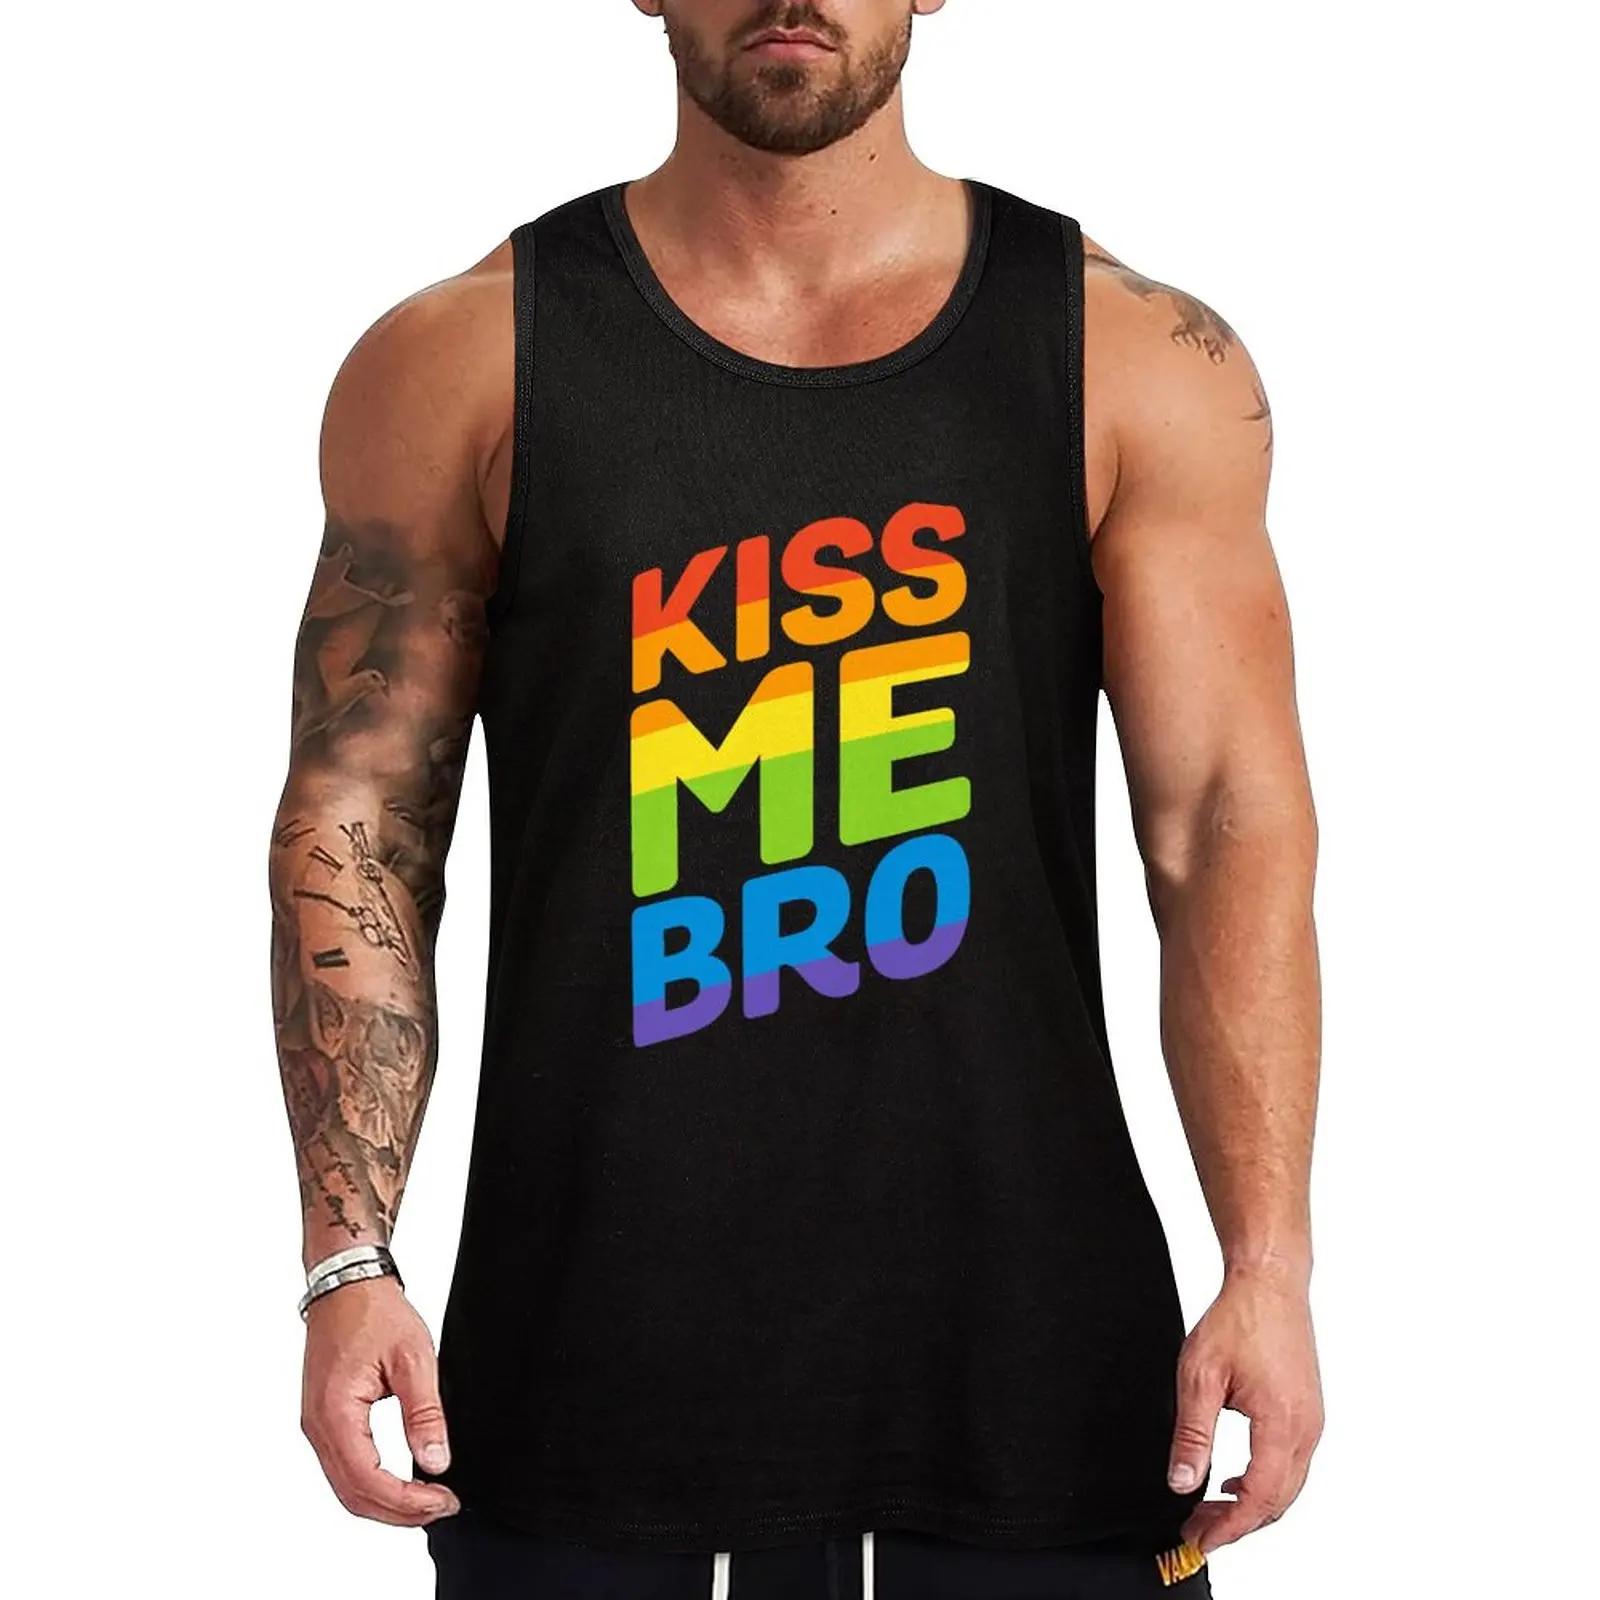 

Kiss Me Bro Rainbow Gay Pride Tank Top Men's clothing brands Man clothes for gym